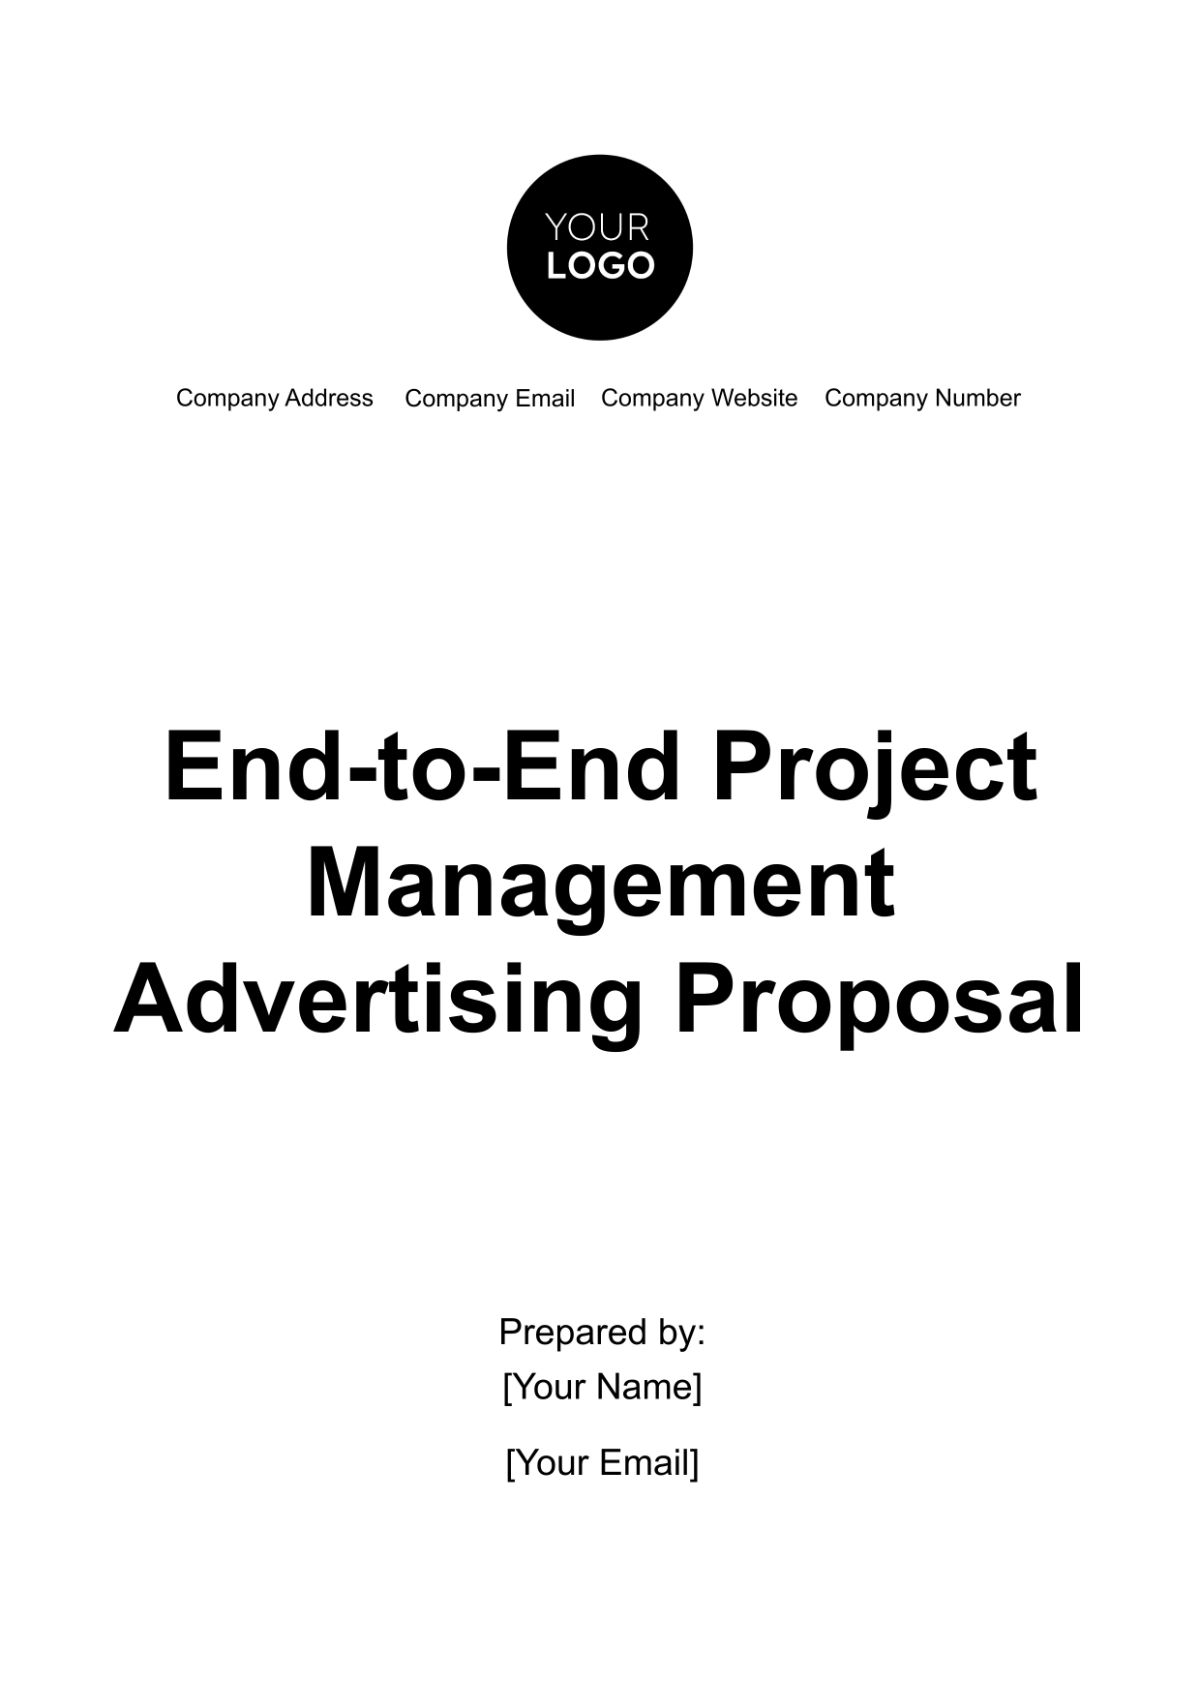 Free End-to-End Project Management Advertising Proposal Template